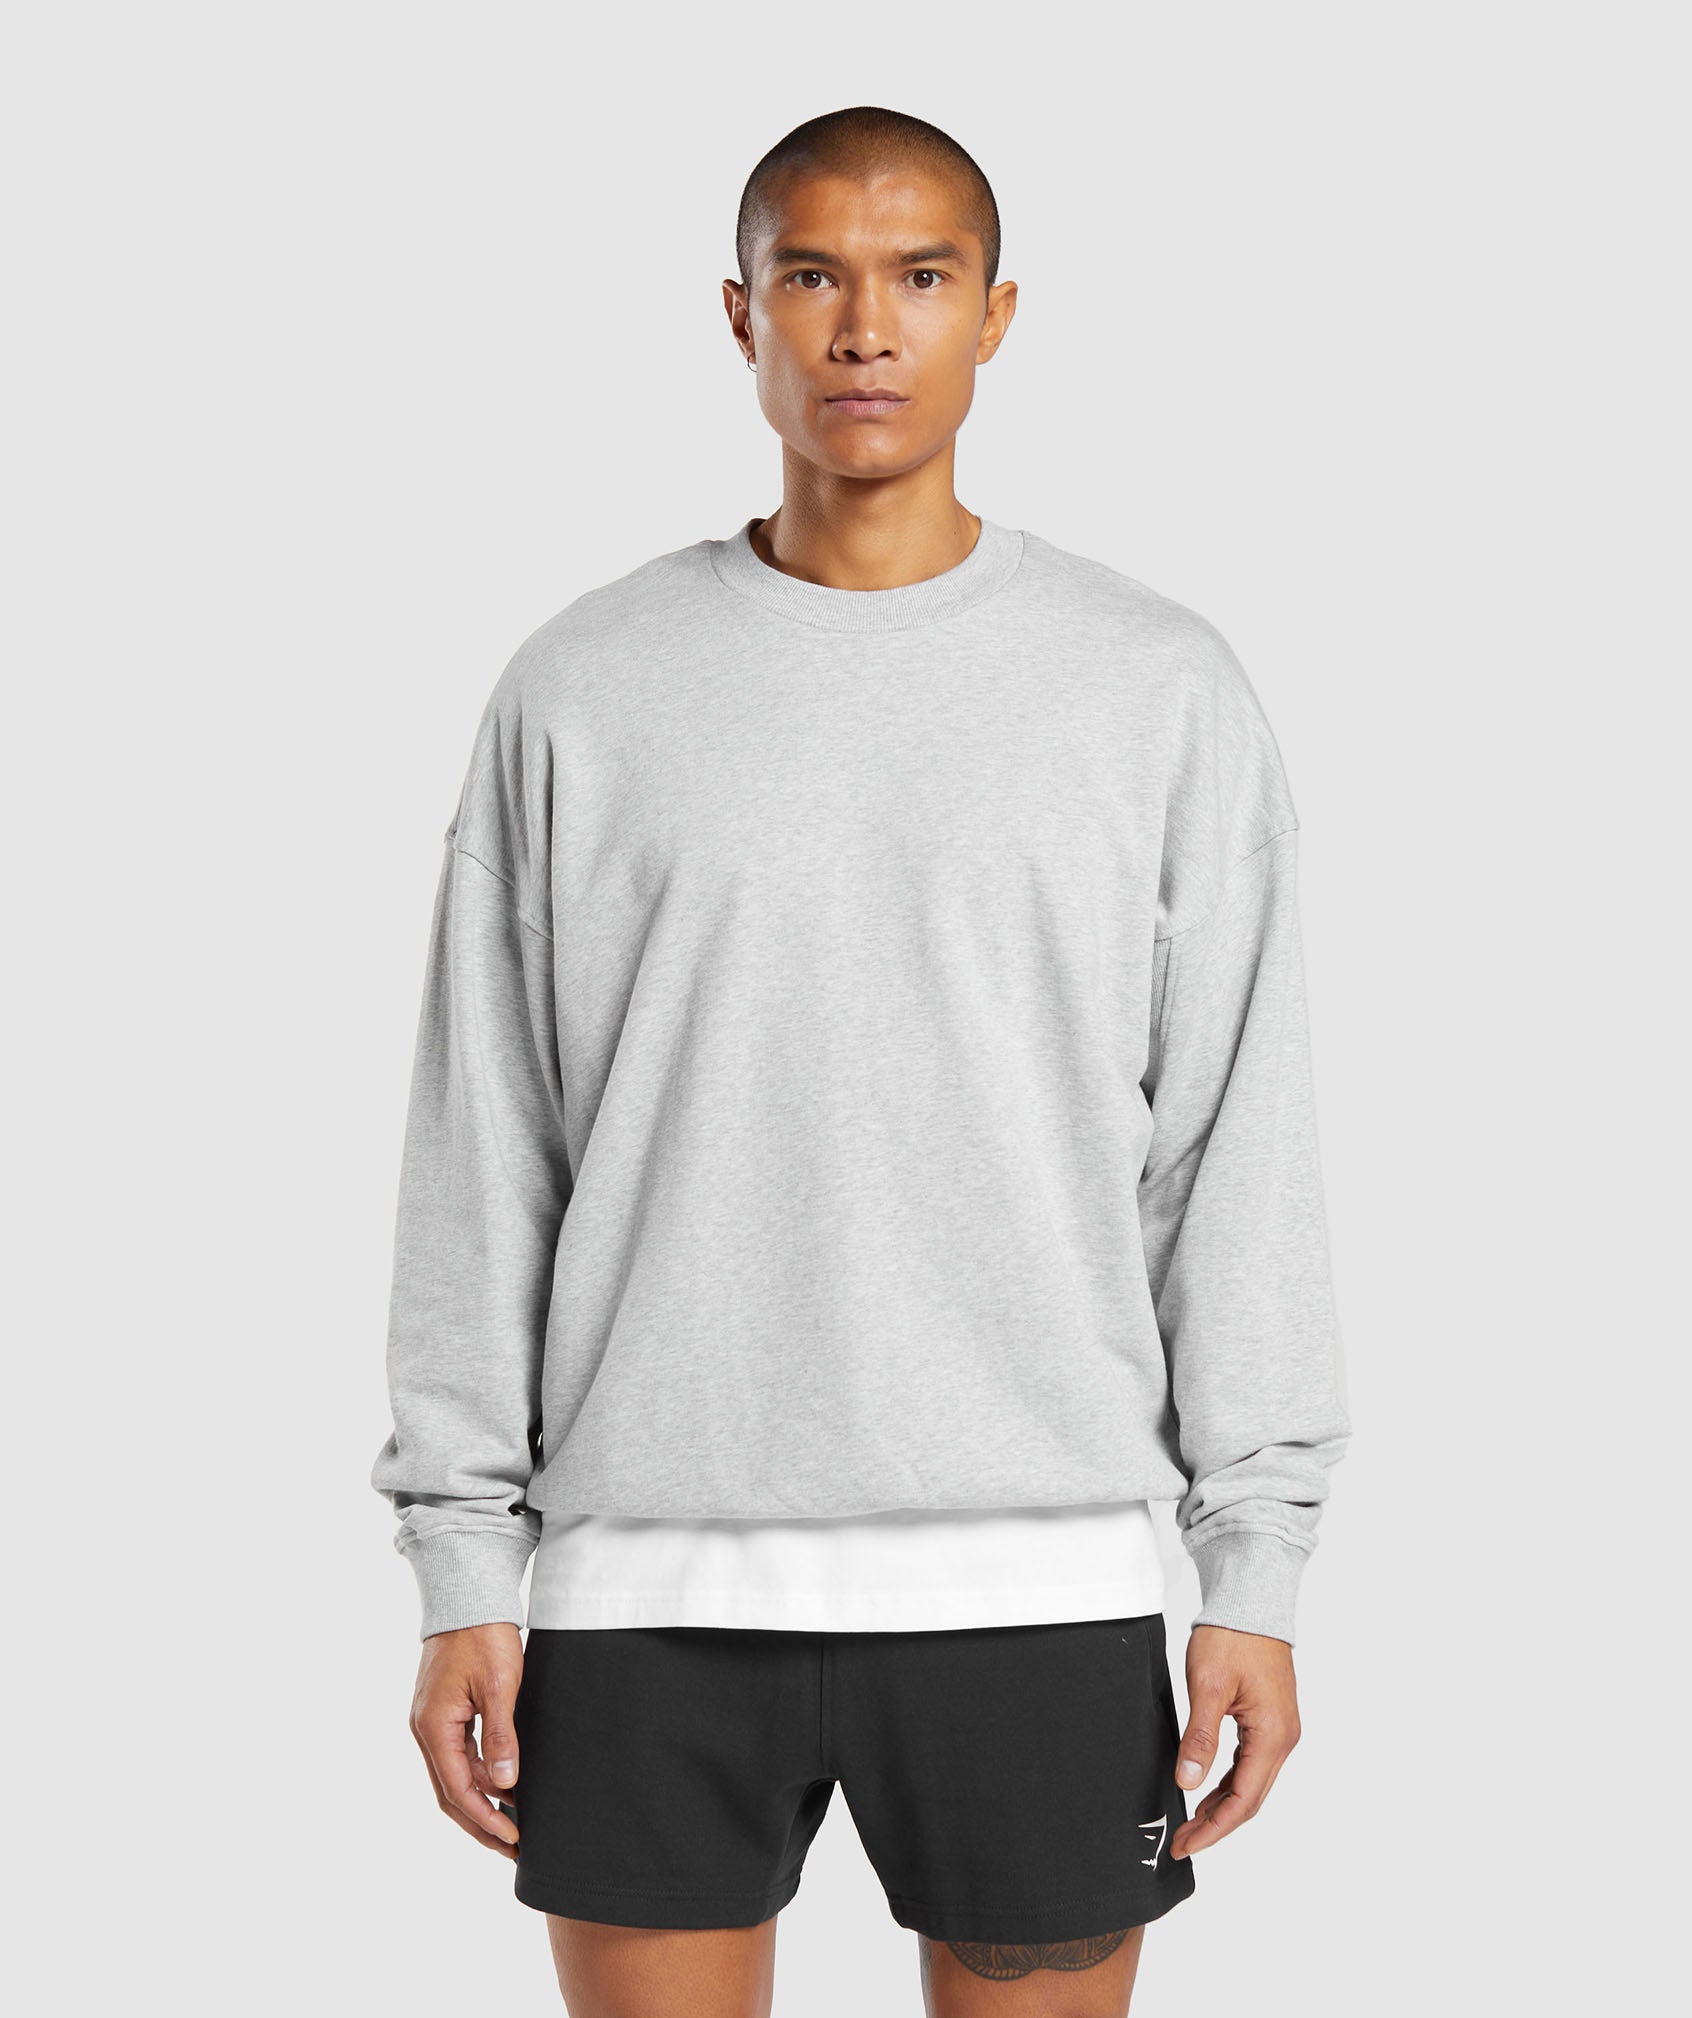 Rest Day Essential Crew in Light Grey Core Marl - view 1